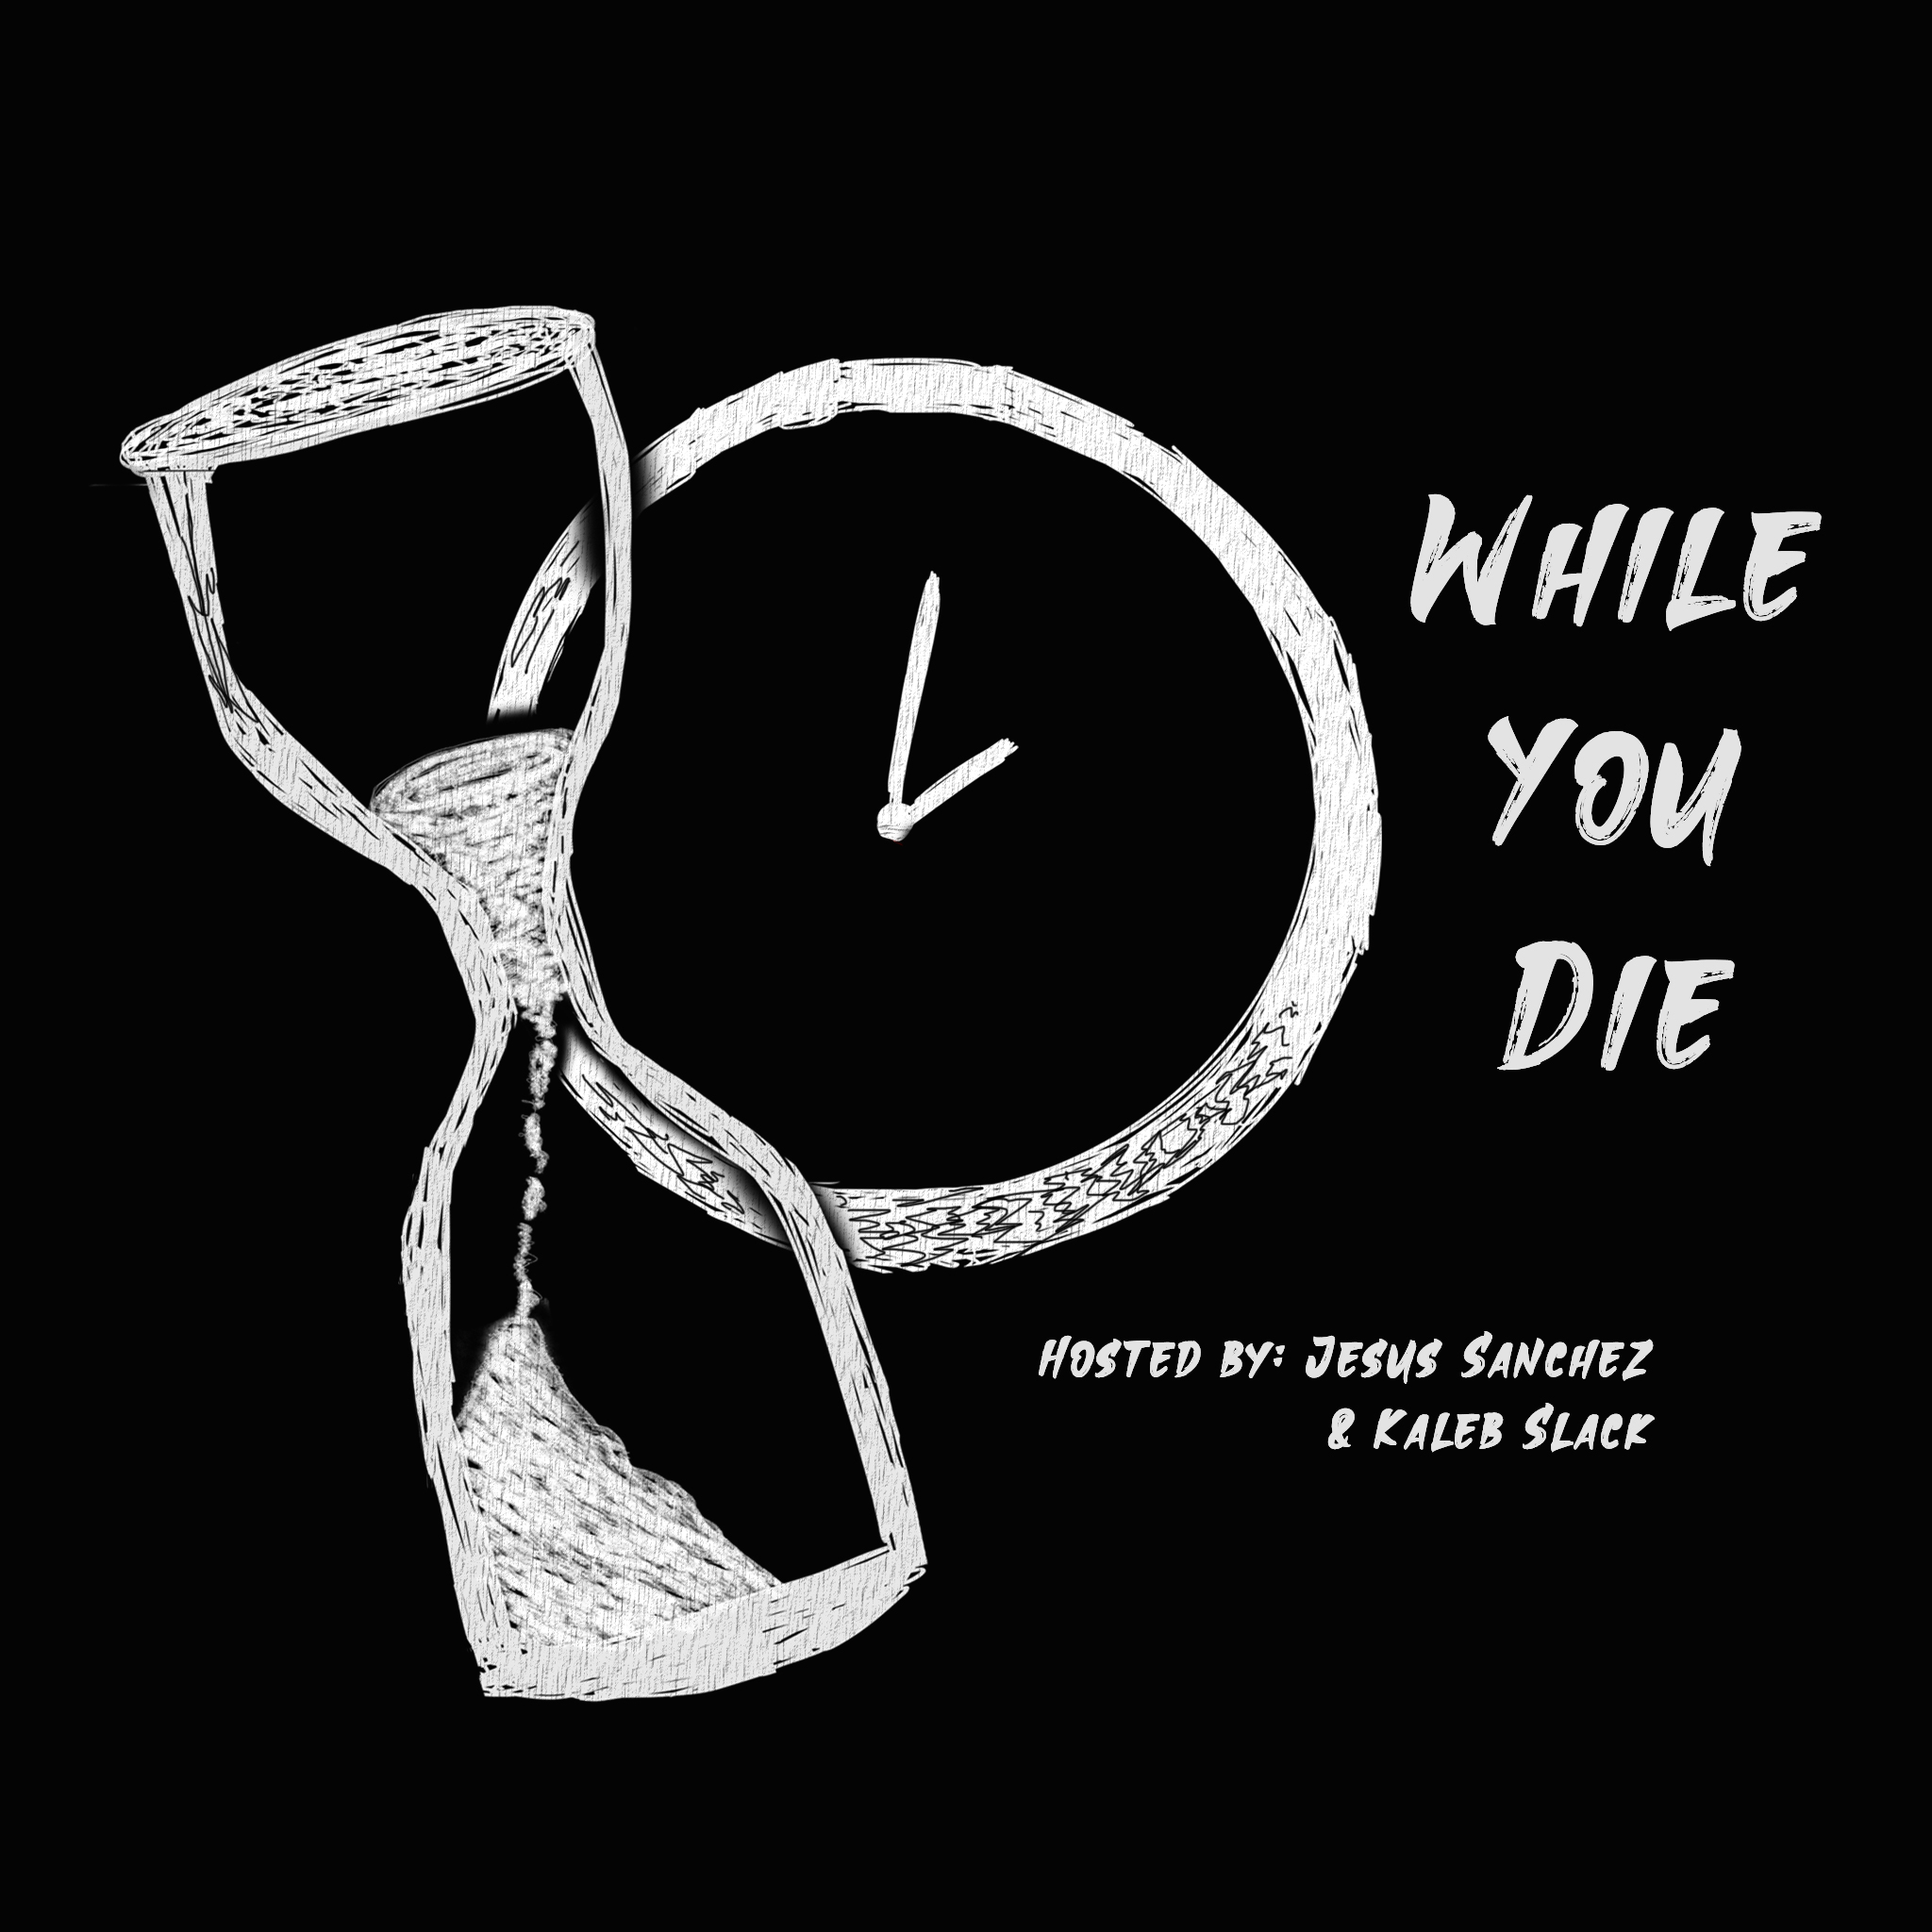 While You Die